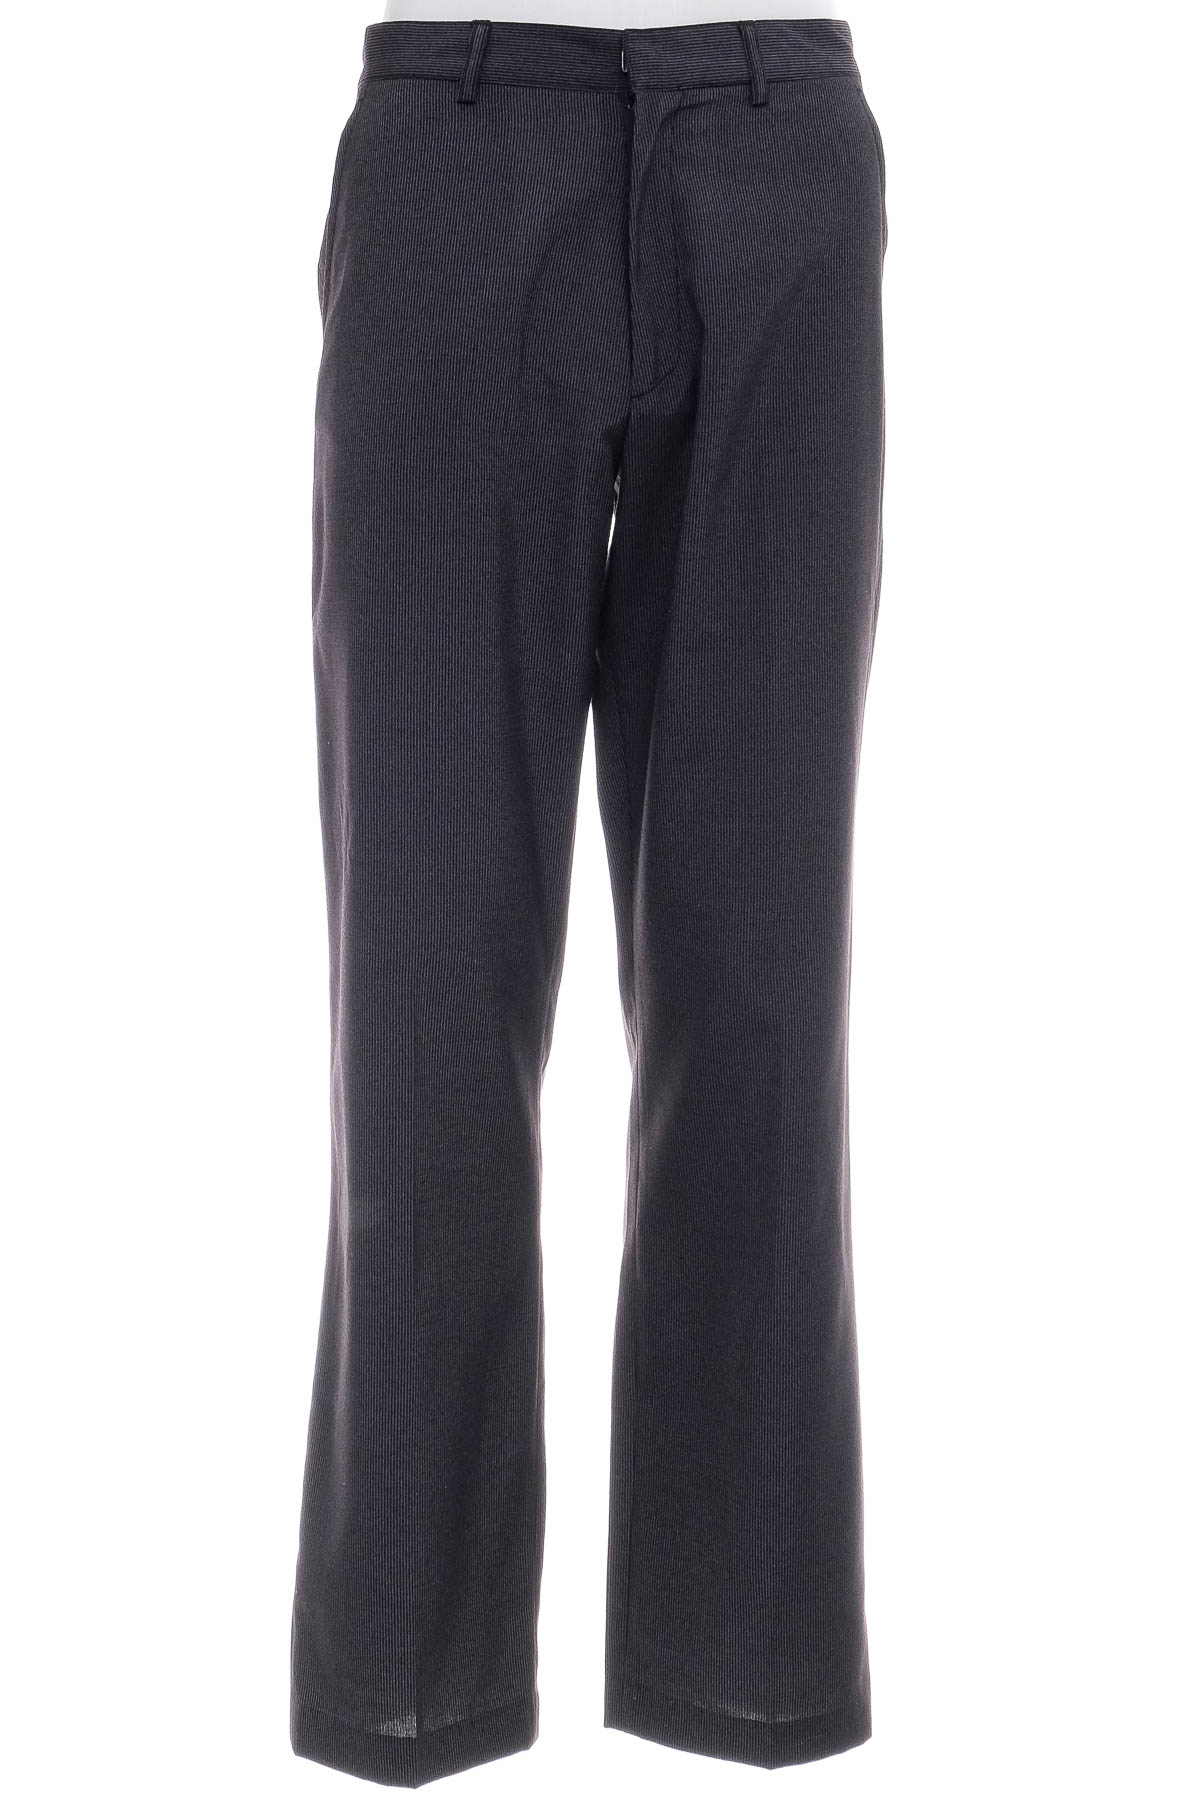 Trousers for boy - Gatonegro - 0